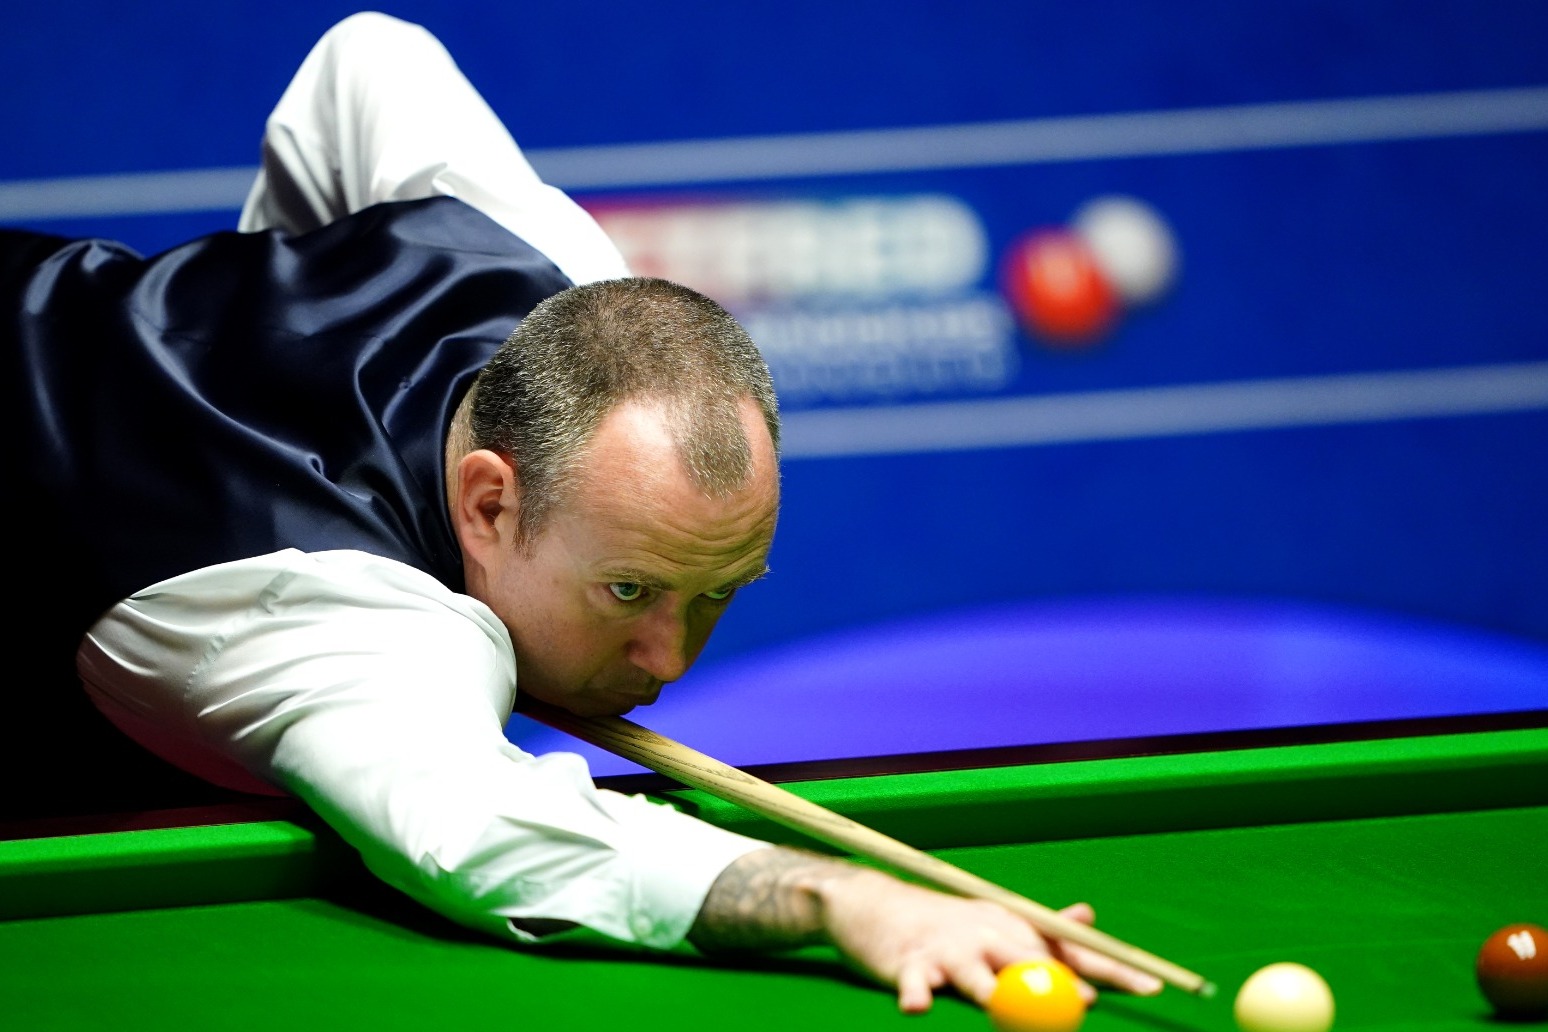 Judd Trump in box seat against Mark Williams as they battle for place in final 